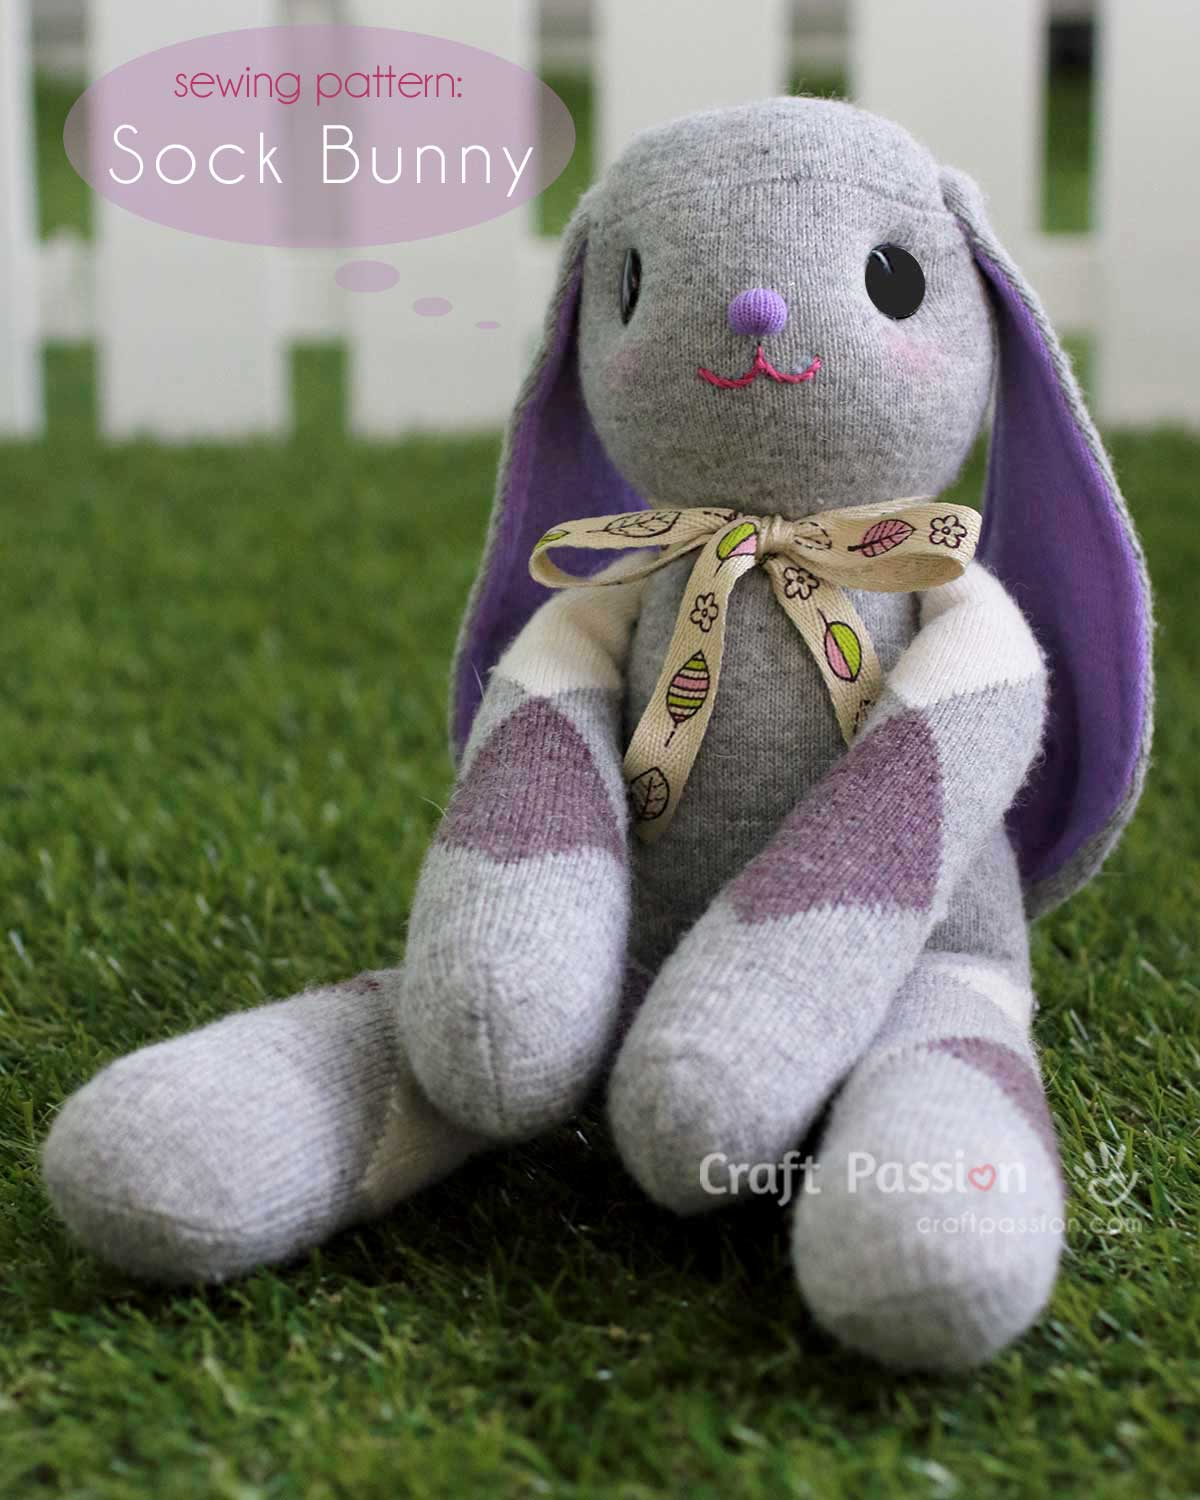 Free bunny sewing pattern to sew as an Easter bunny. This cute lop-eared stuffed bunny that's sewed from sock is a great gift to make for kids. Instructions come with pictures.